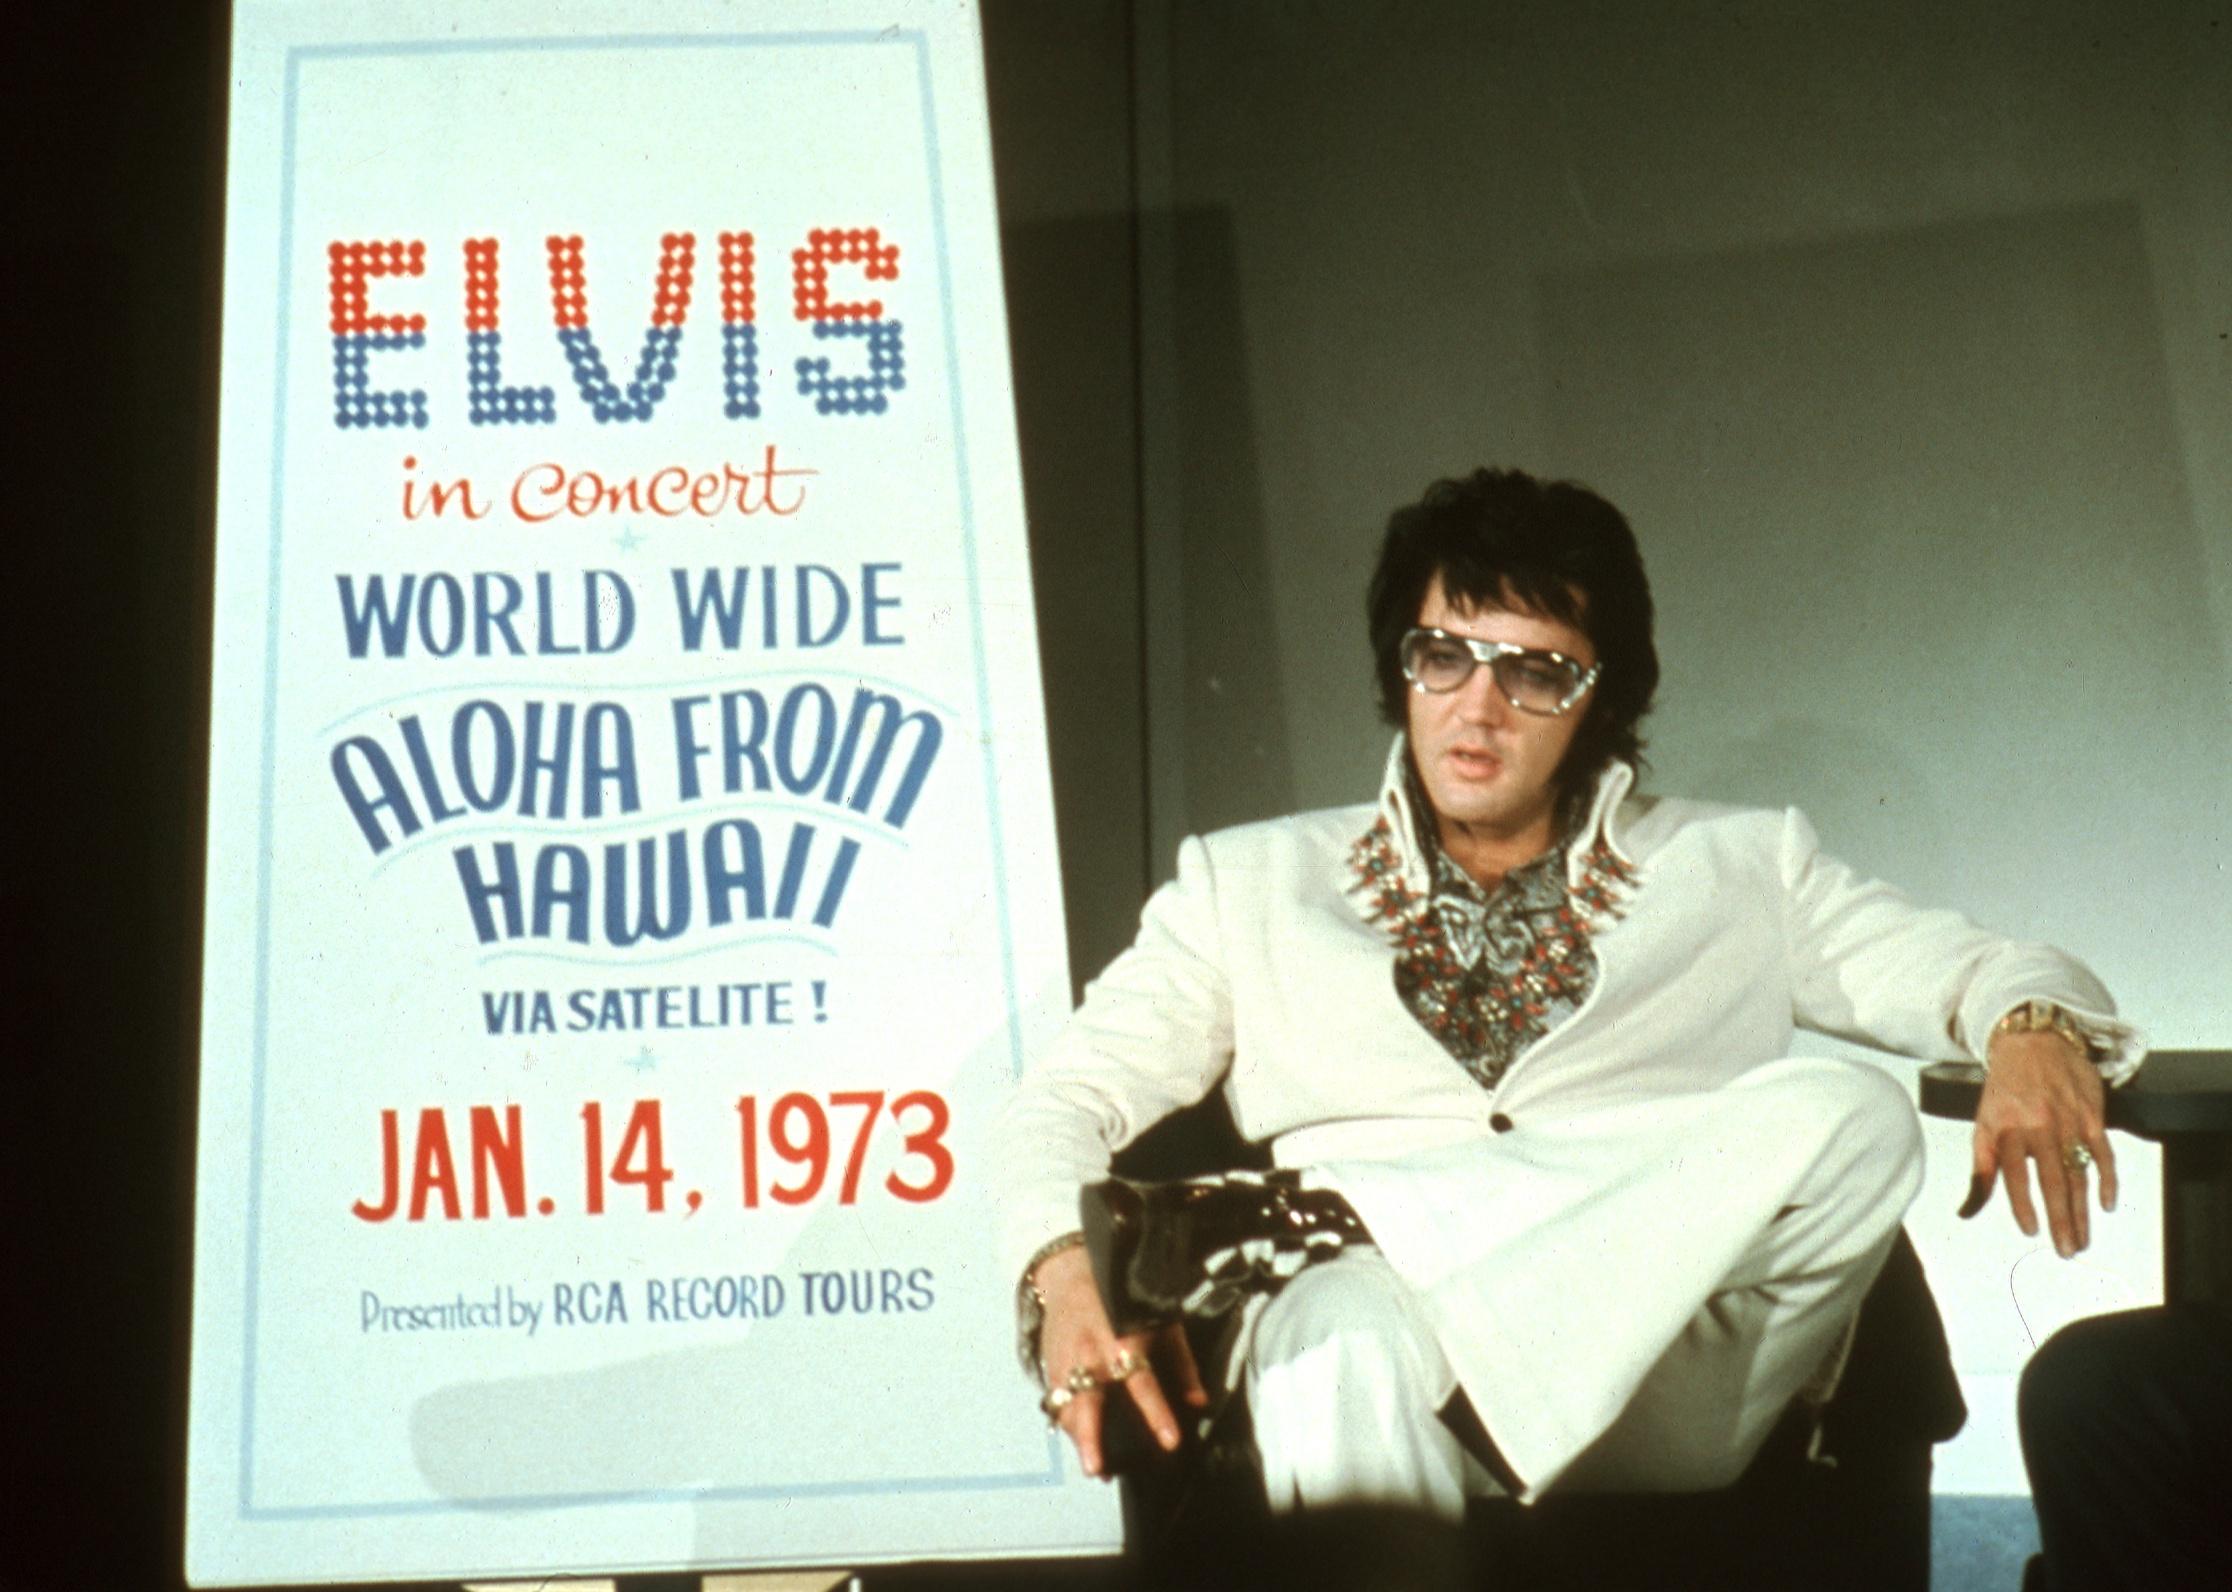 <p>Elvis Presley's historic performance at the Honolulu International Center was the <a href="https://www.atlasobscura.com/places/neal-s-blaisdell-center">first full concert to be broadcast worldwide via satellite</a>. He sang a number of well-known hits while wearing a bejeweled cape, which he threw into the audience at the end. The concert <a href="https://www.thekingsransom.com/press/Elvis%20Presley%20Aloha%20From%20Hawaii%20Cape.pdf">aired in over 40 countries</a>.</p>